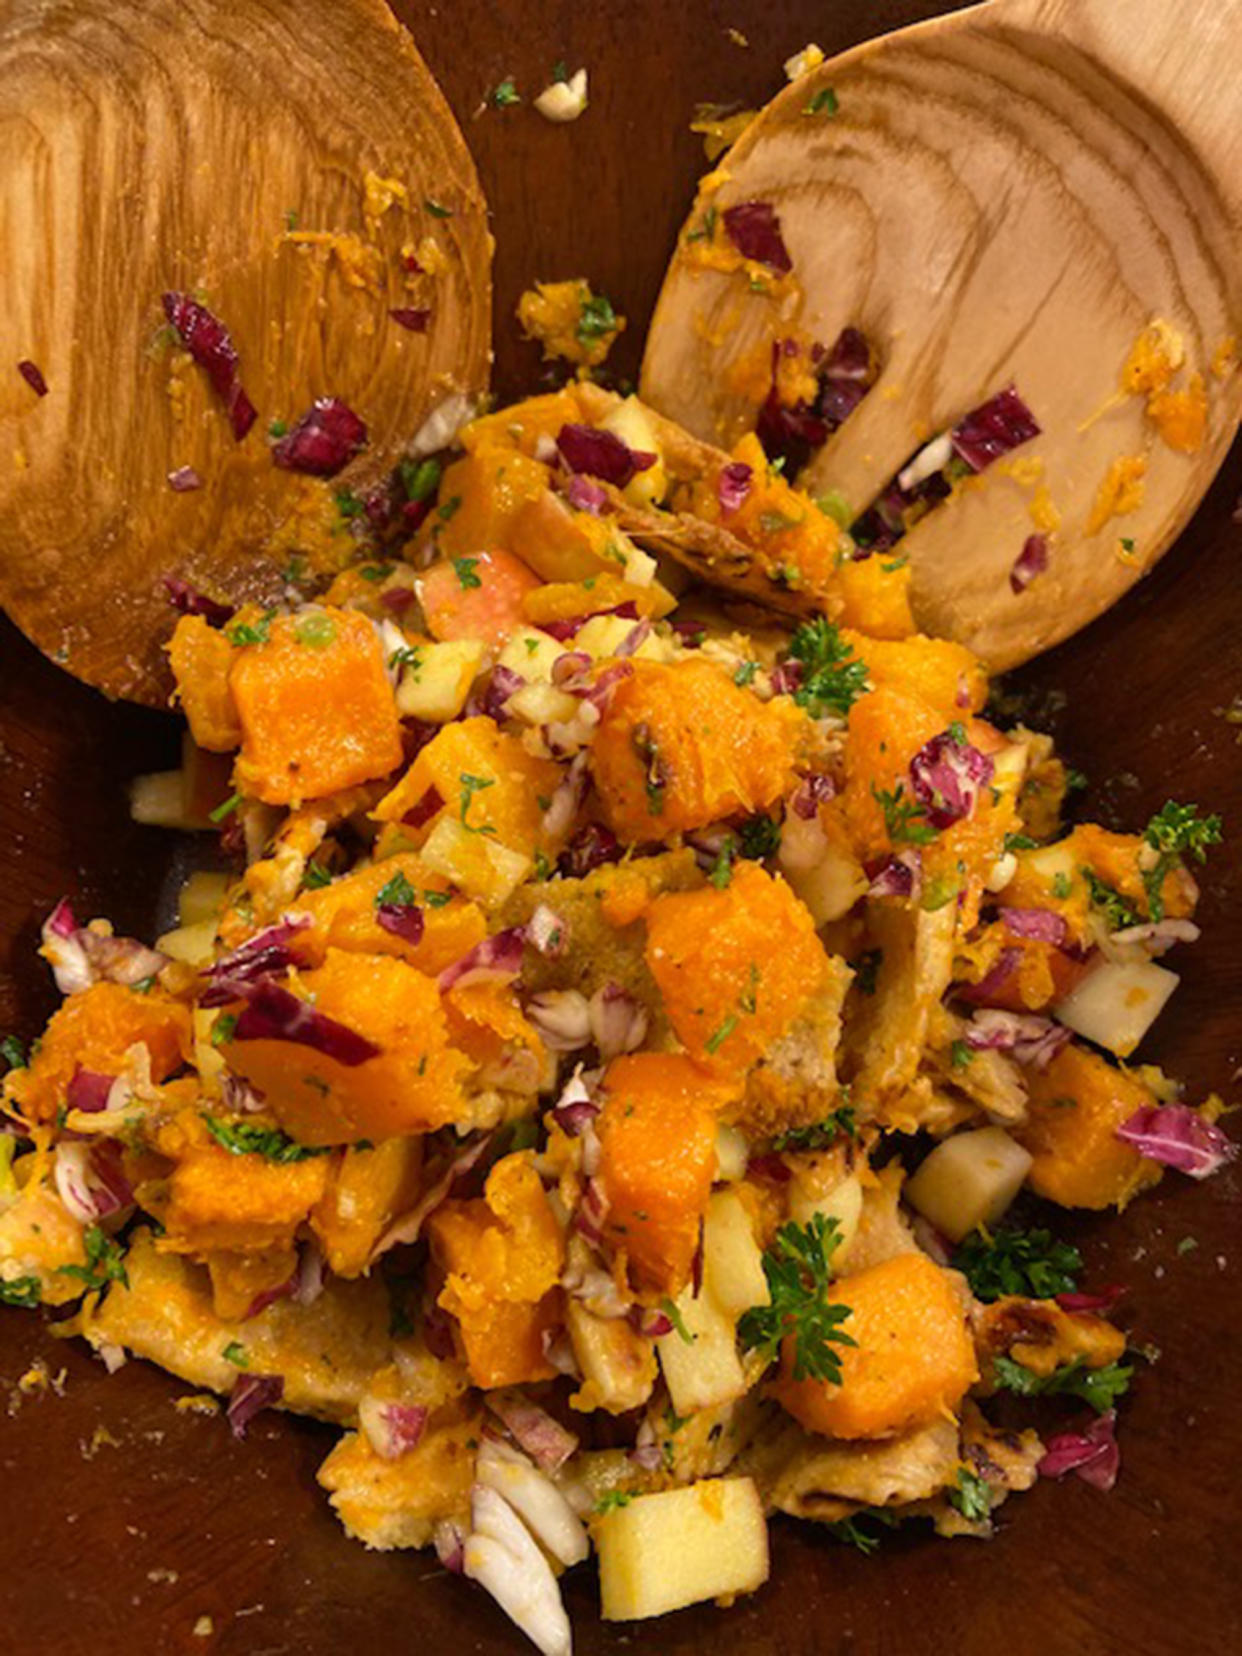 Peter's wife and two daughters joined him in the kitchen to test out the butternut squash and apple fattoush recipe. (Peter Alexander)